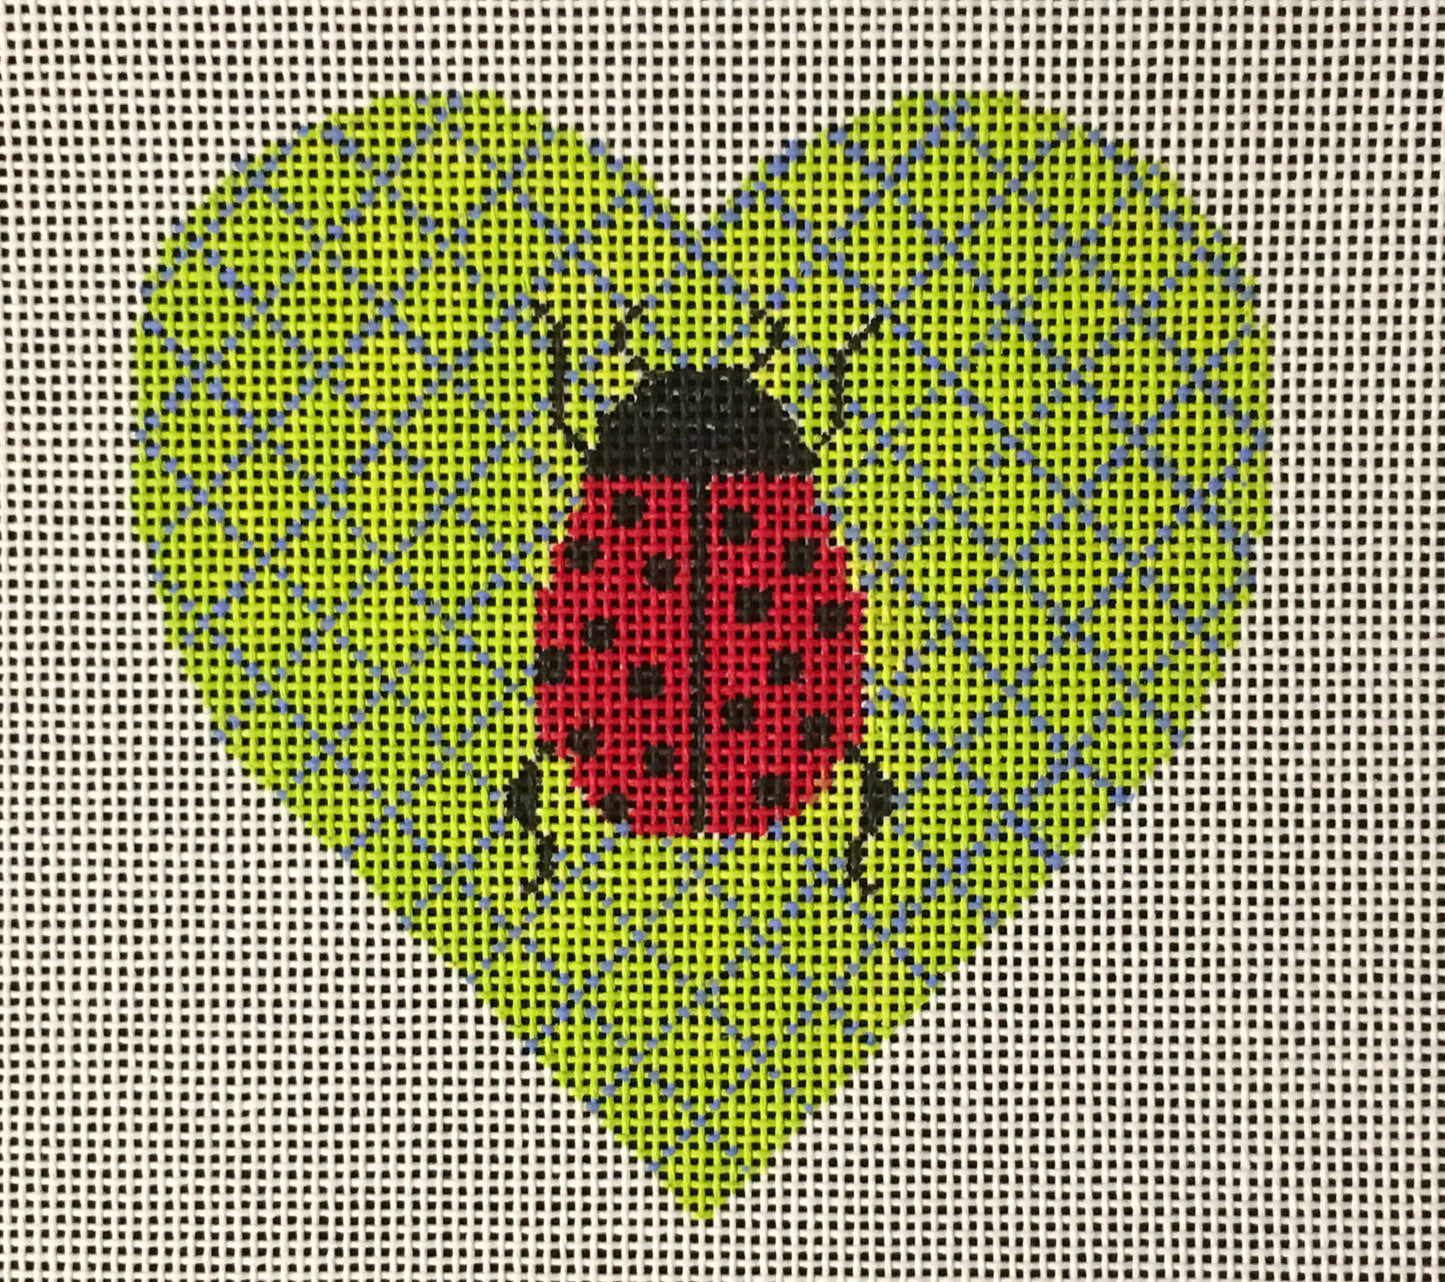 Vallerie Needlepoint Gallery heart needlepoint canvas of a ladybug on a green geometric background